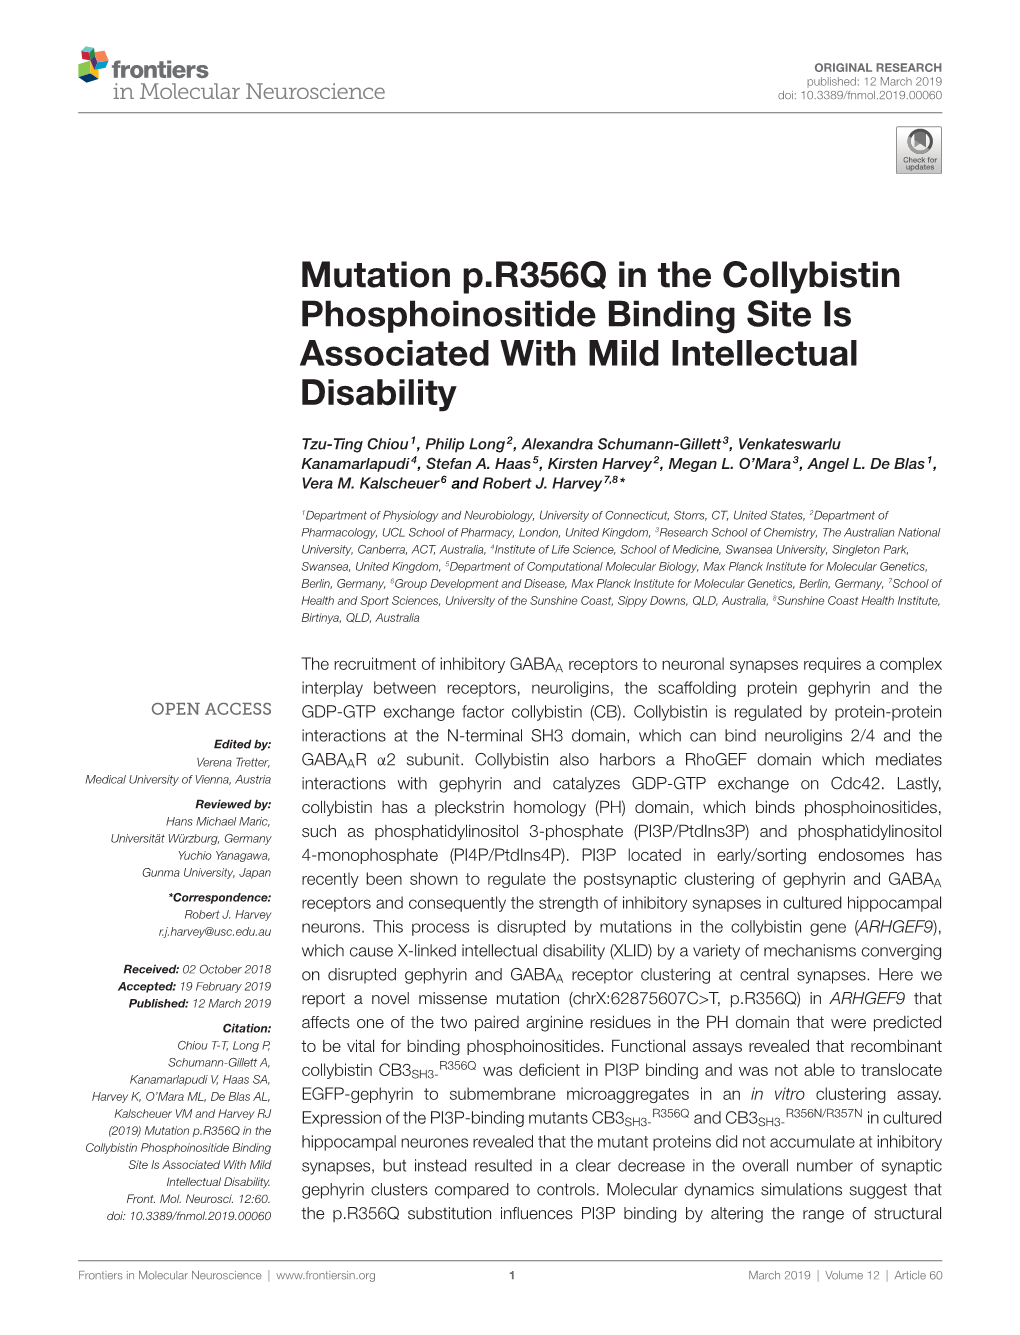 Mutation P.R356Q in the Collybistin Phosphoinositide Binding Site Is Associated with Mild Intellectual Disability